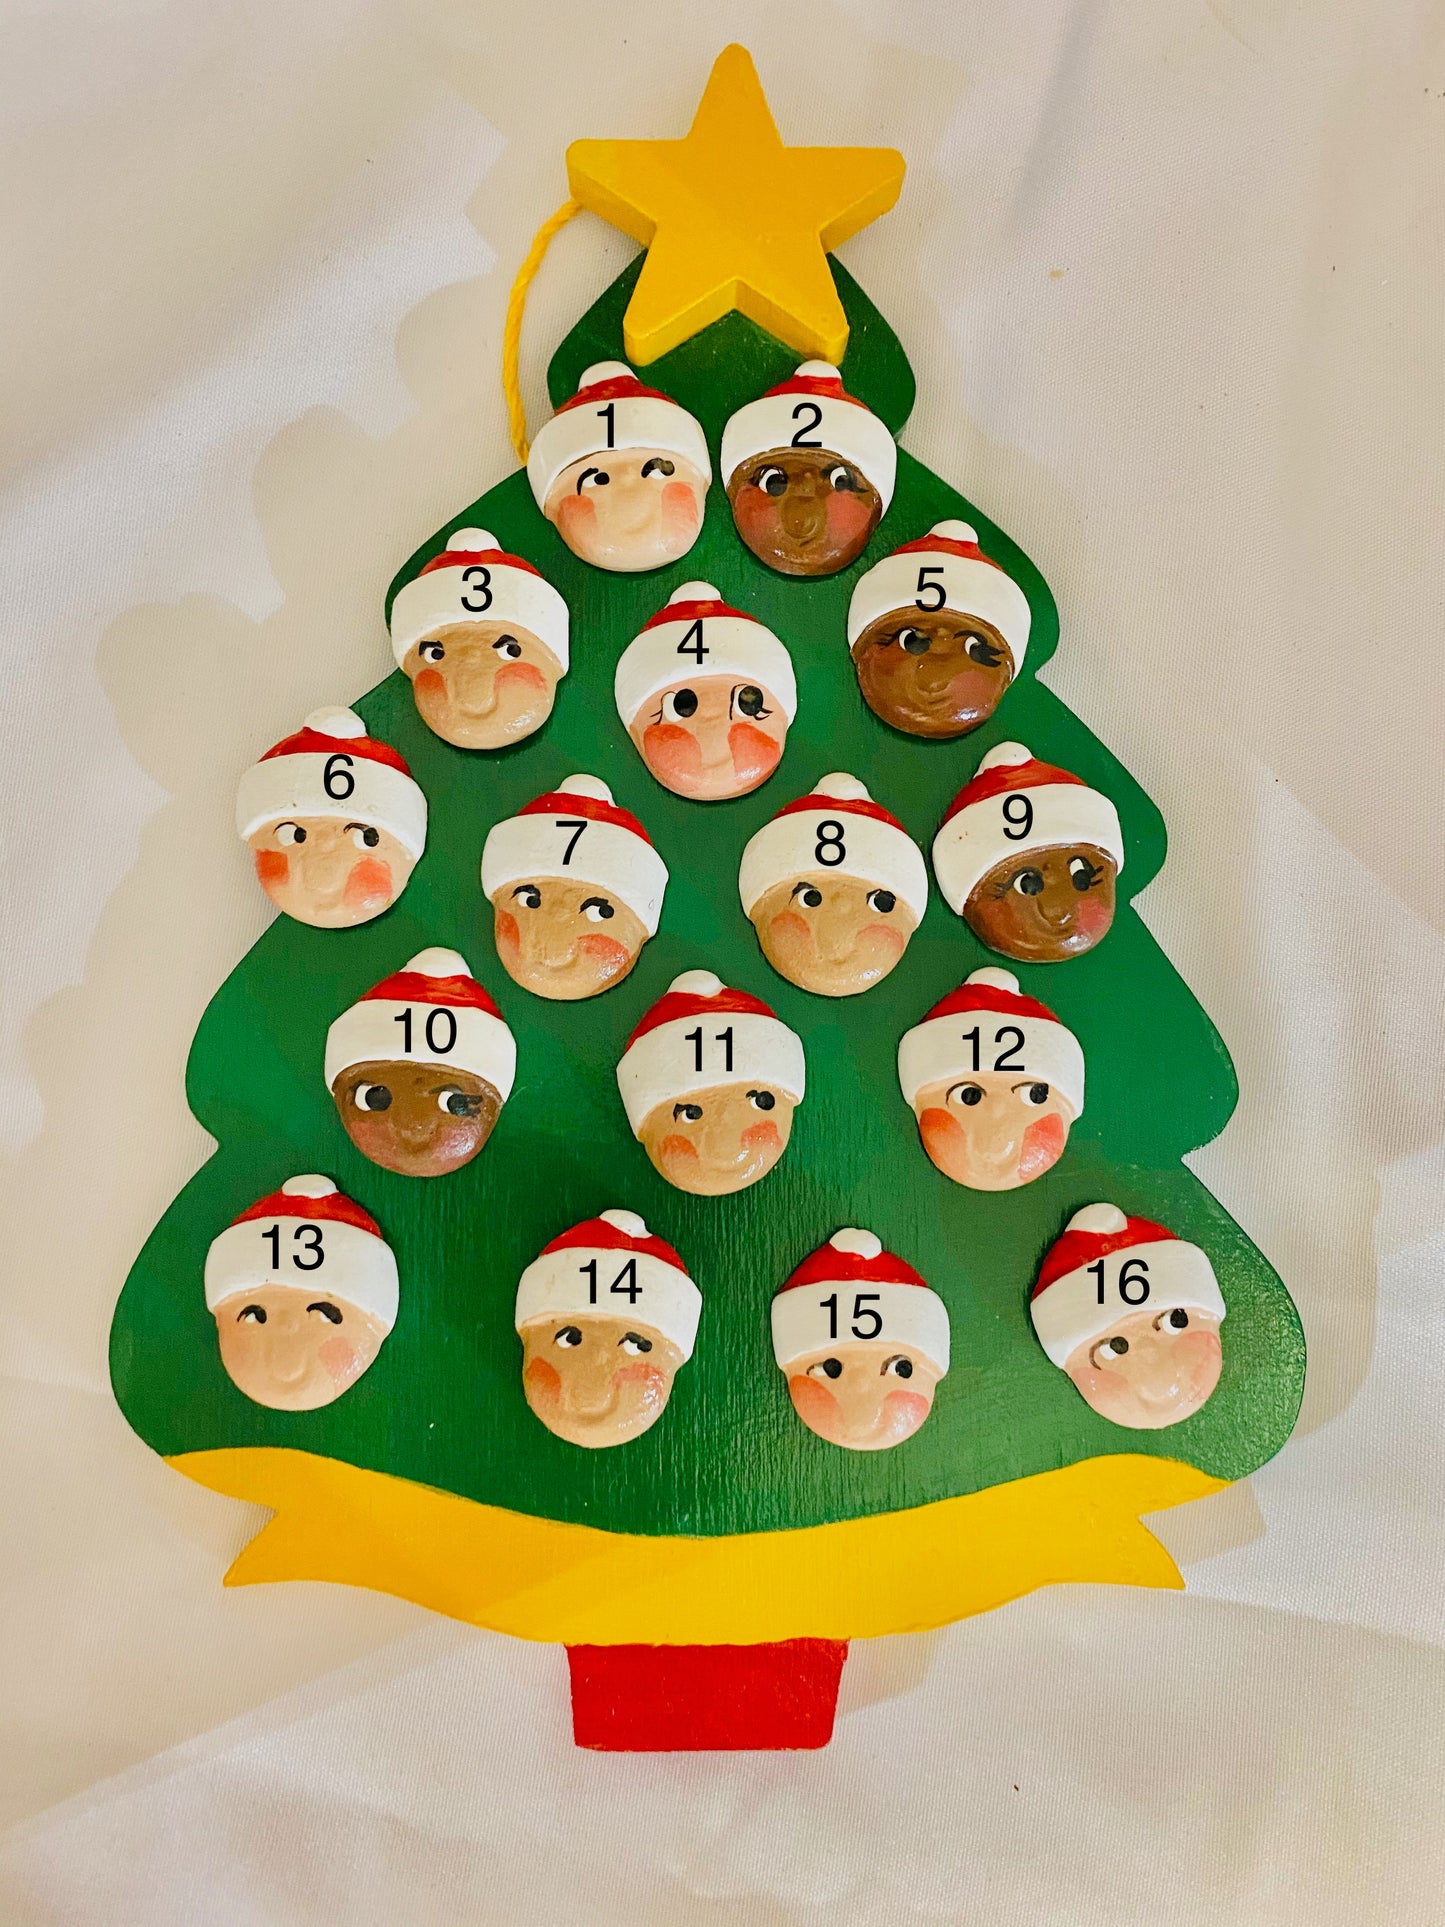 Personalized Ornament  16 Santa Faces on a Christmas Tree  7.5" x 6"